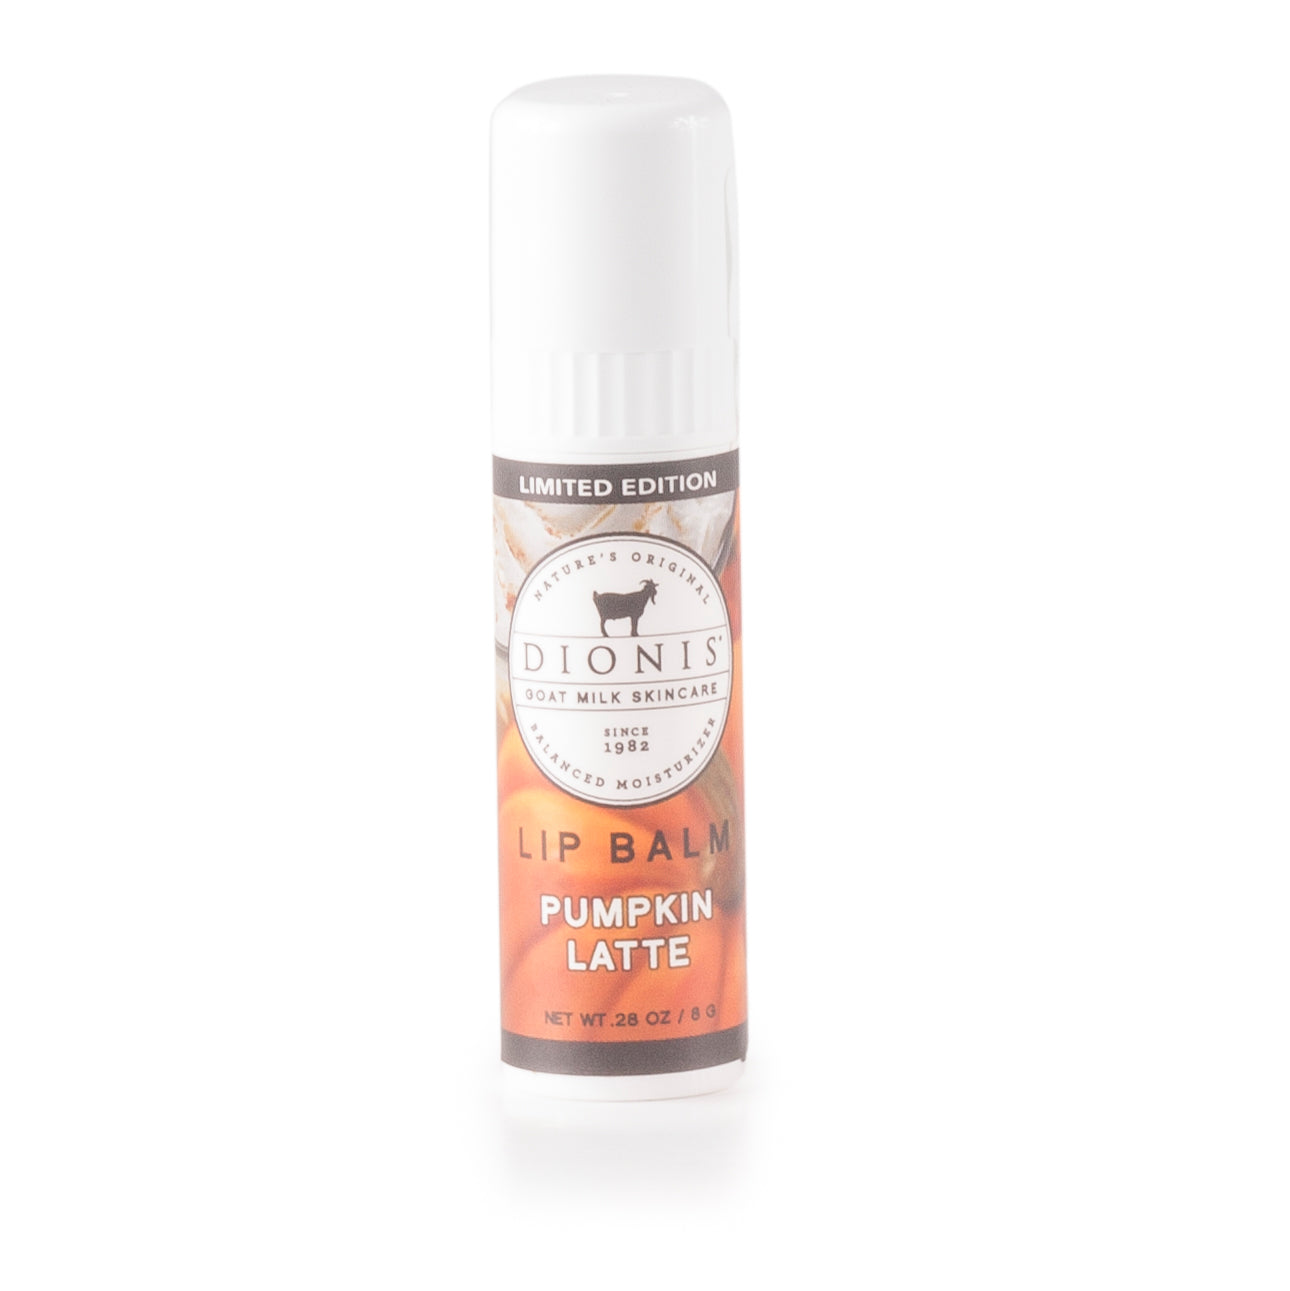 Lip Balm by doinis Pumpkin Latte Click to open in modal